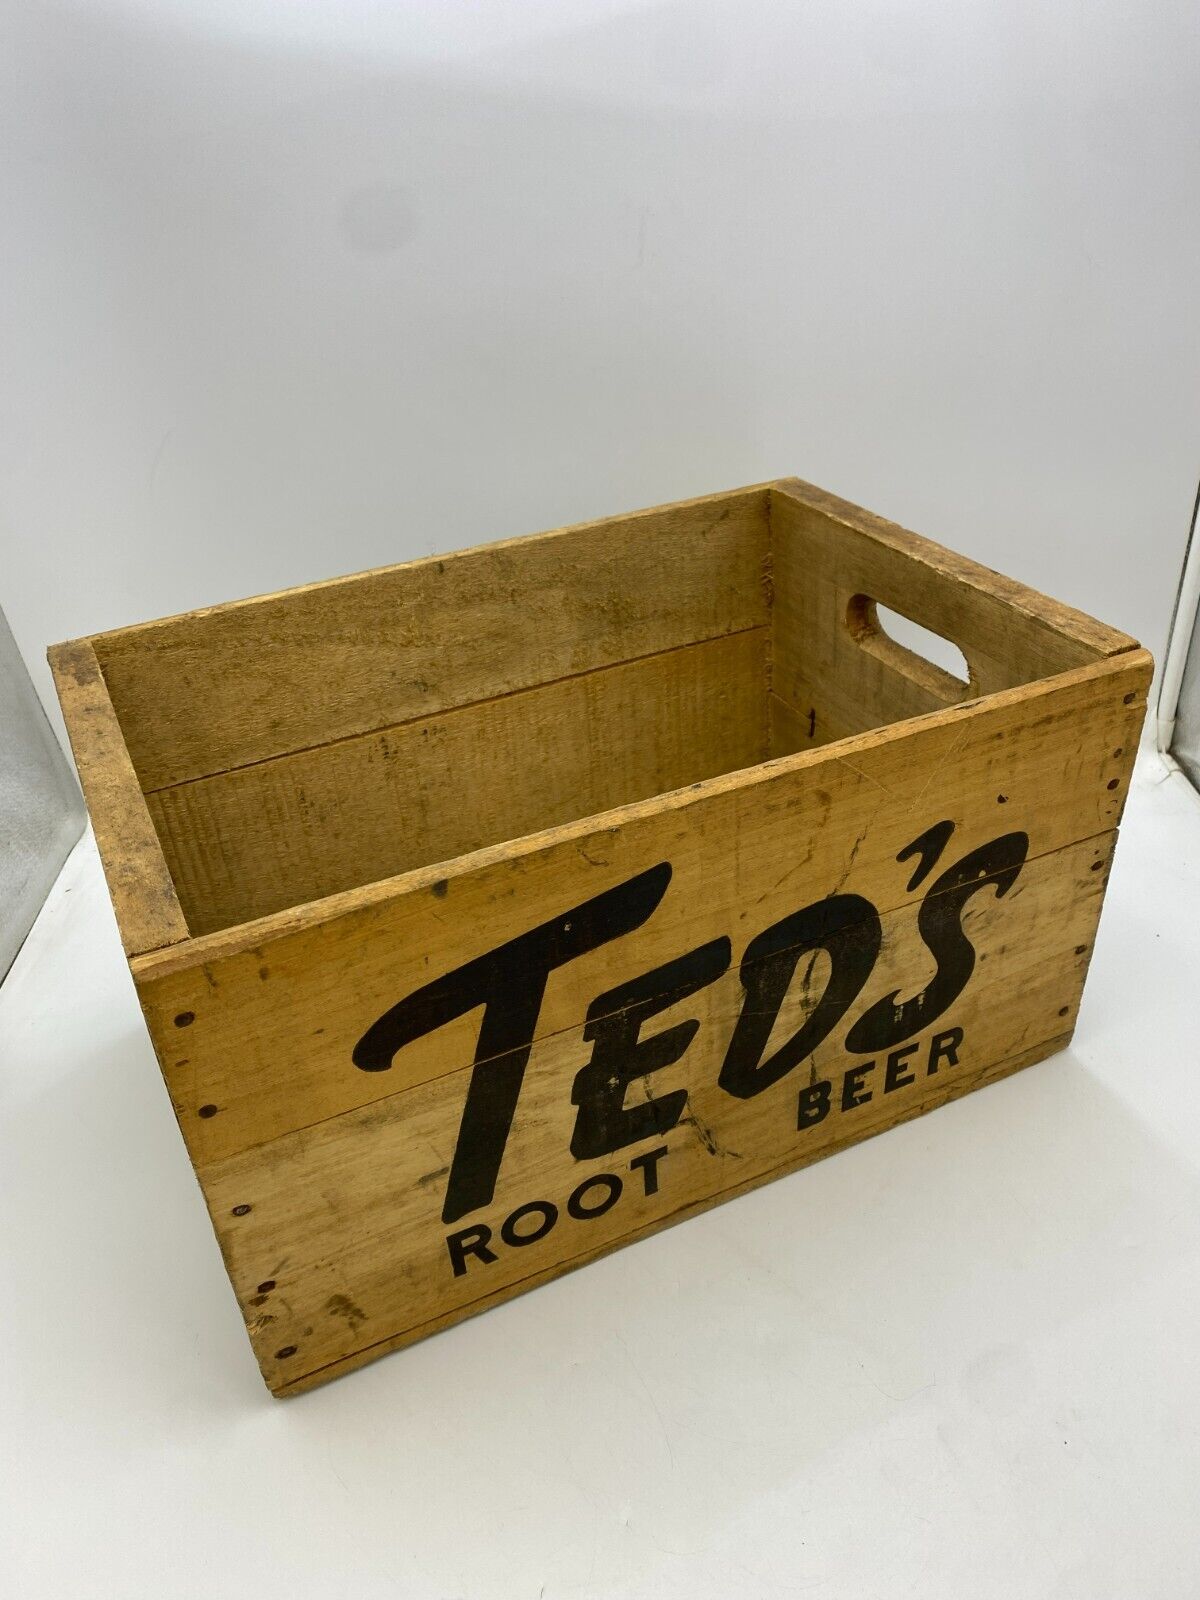 Ted\'s Root Beer Wooden Soda Crate 2 Dozen 12oz Moxie Co Boston Antique 1950s